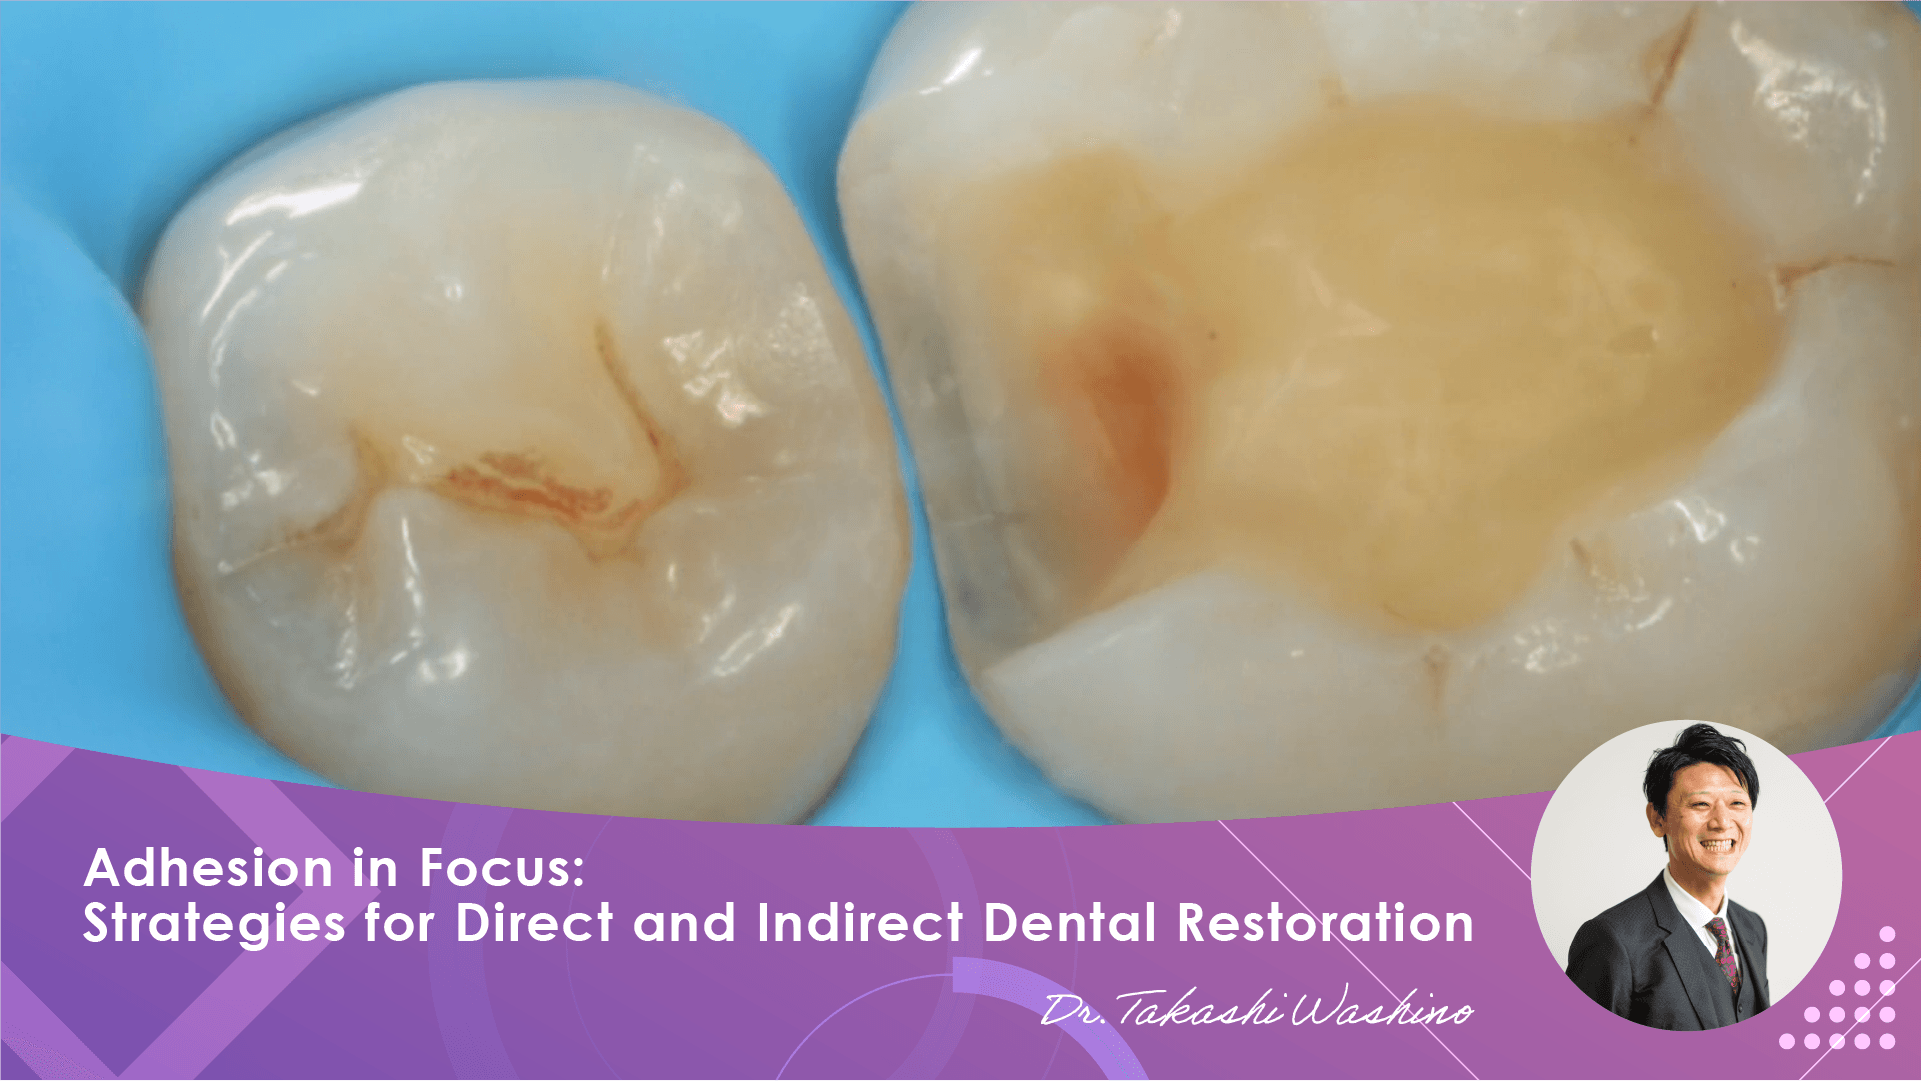 Adhesion in Focus: Strategies for Direct and Indirect Dental Restoration